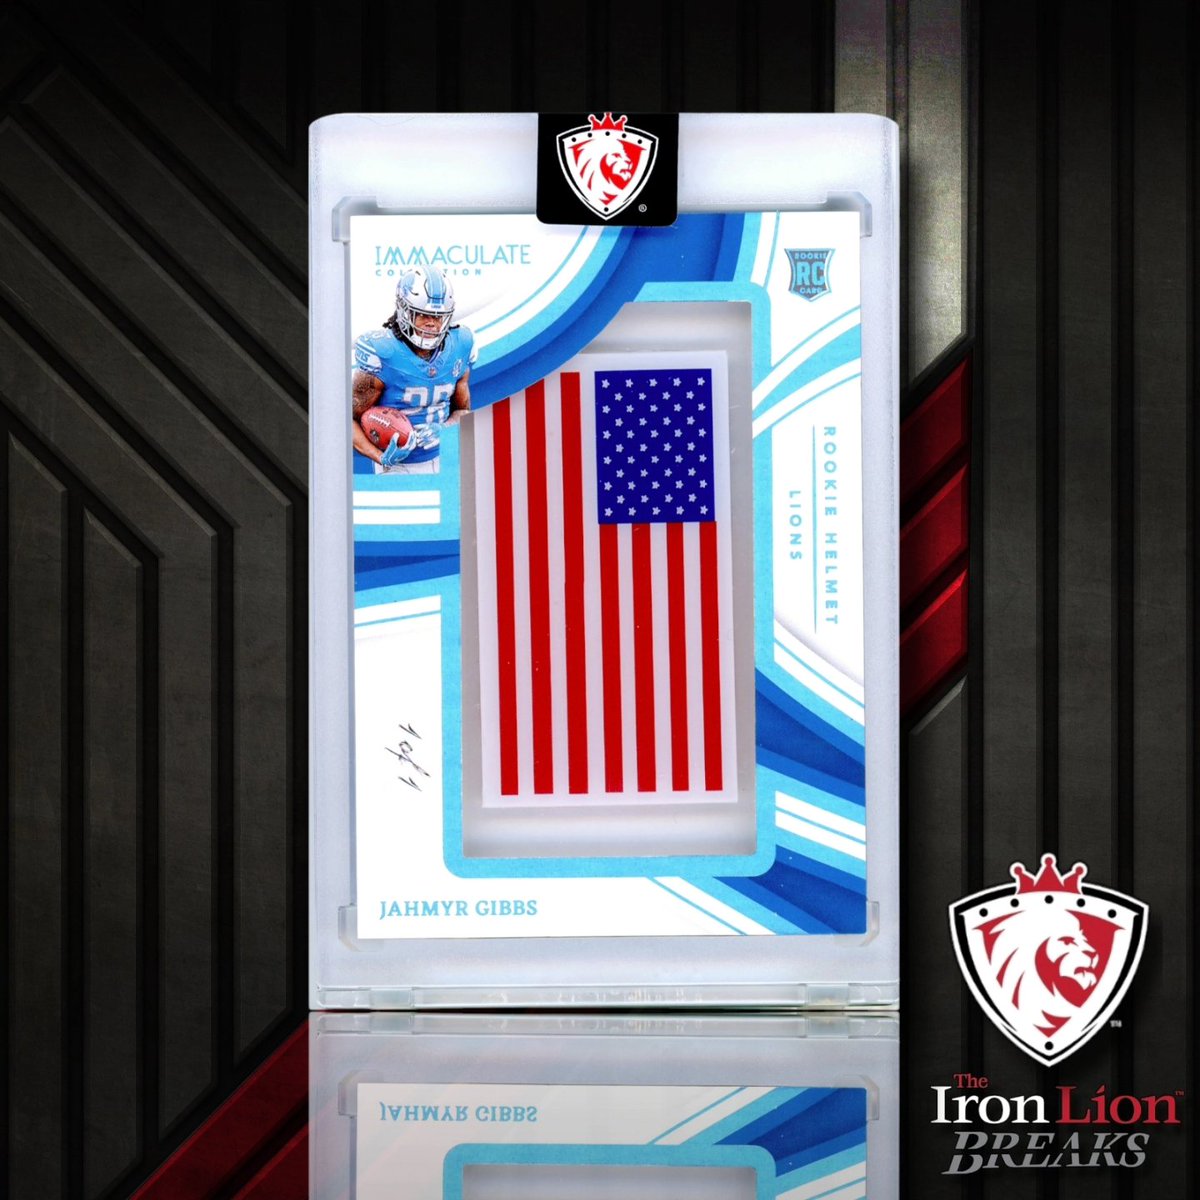 Ironlioncollect tweet picture